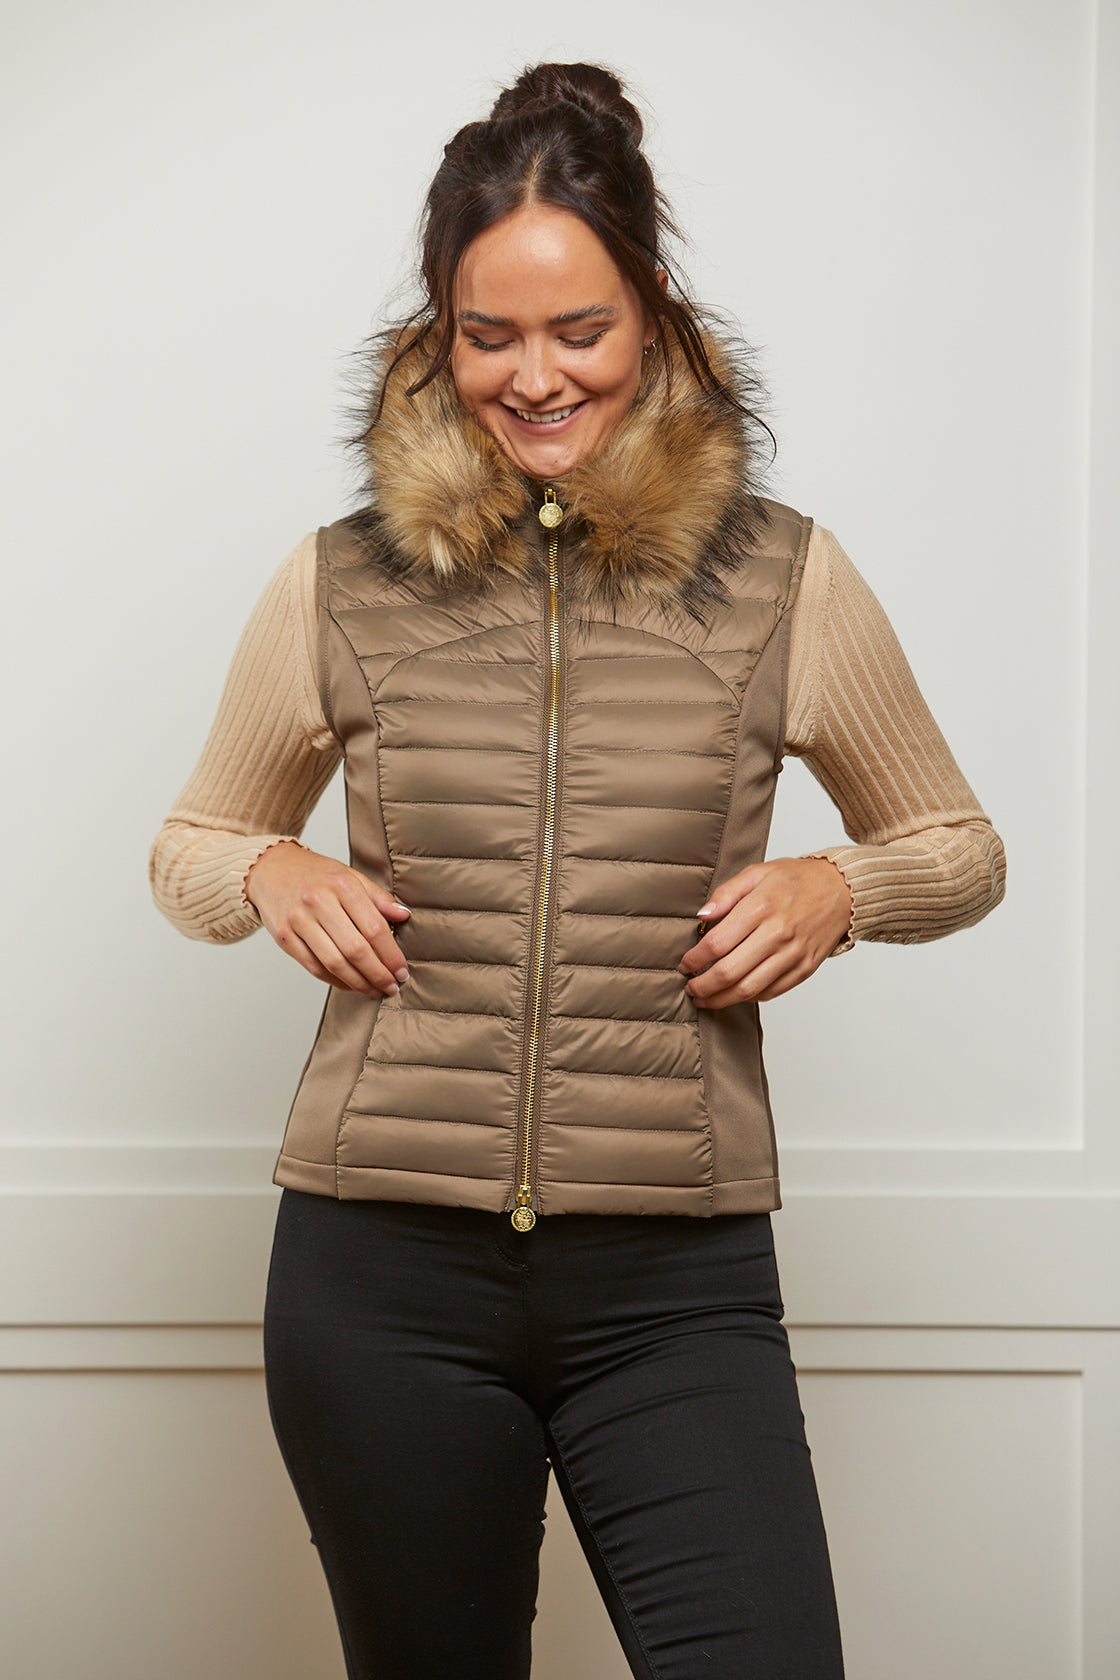 Model wearing a women's puffer gilet in a khaki, bronze colour. The gilet has a detachable faux fur collar and stretch sides. The puffer gilet has a branded gold zip.